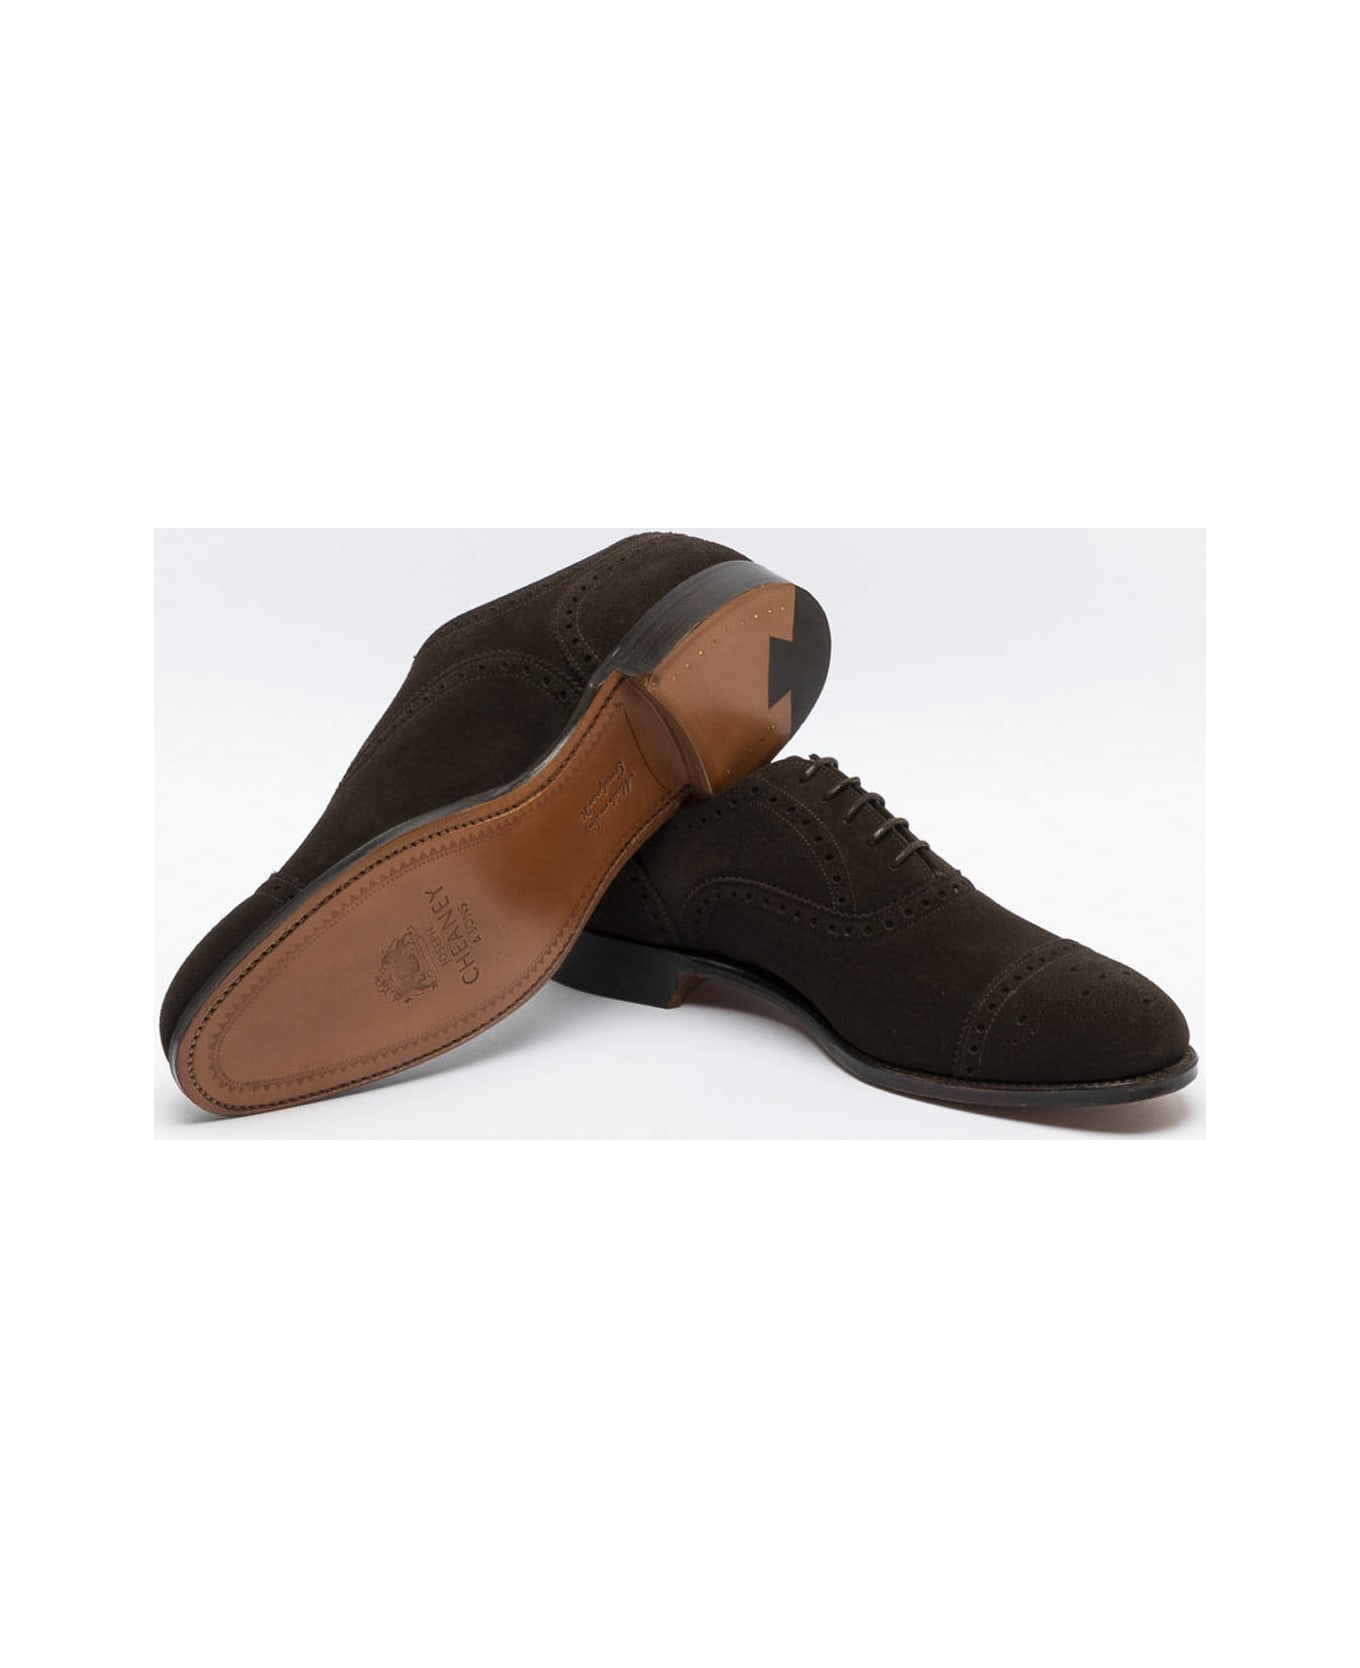 Cheaney Bitter Chololate Suede Shoe - Marrone